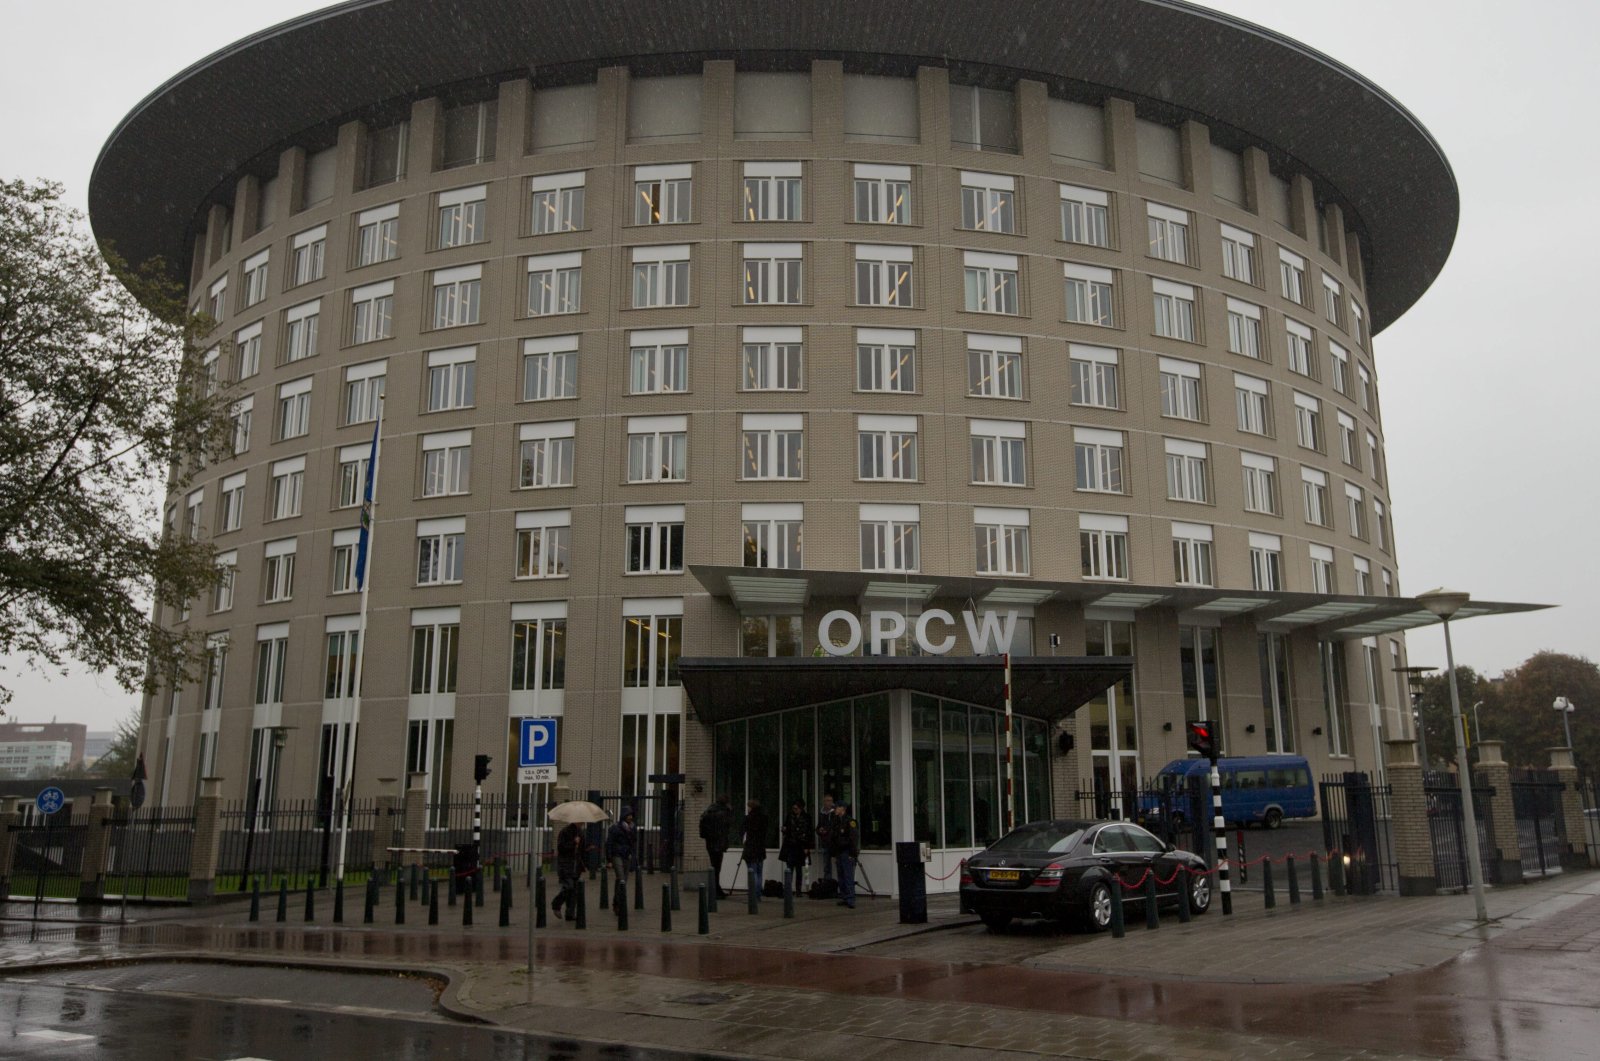 Exterior view of the headquarters of the world's chemical watchdog OPCW, in The Hague, Netherlands, Friday, Oct. 11, 2013. (AP Photo)